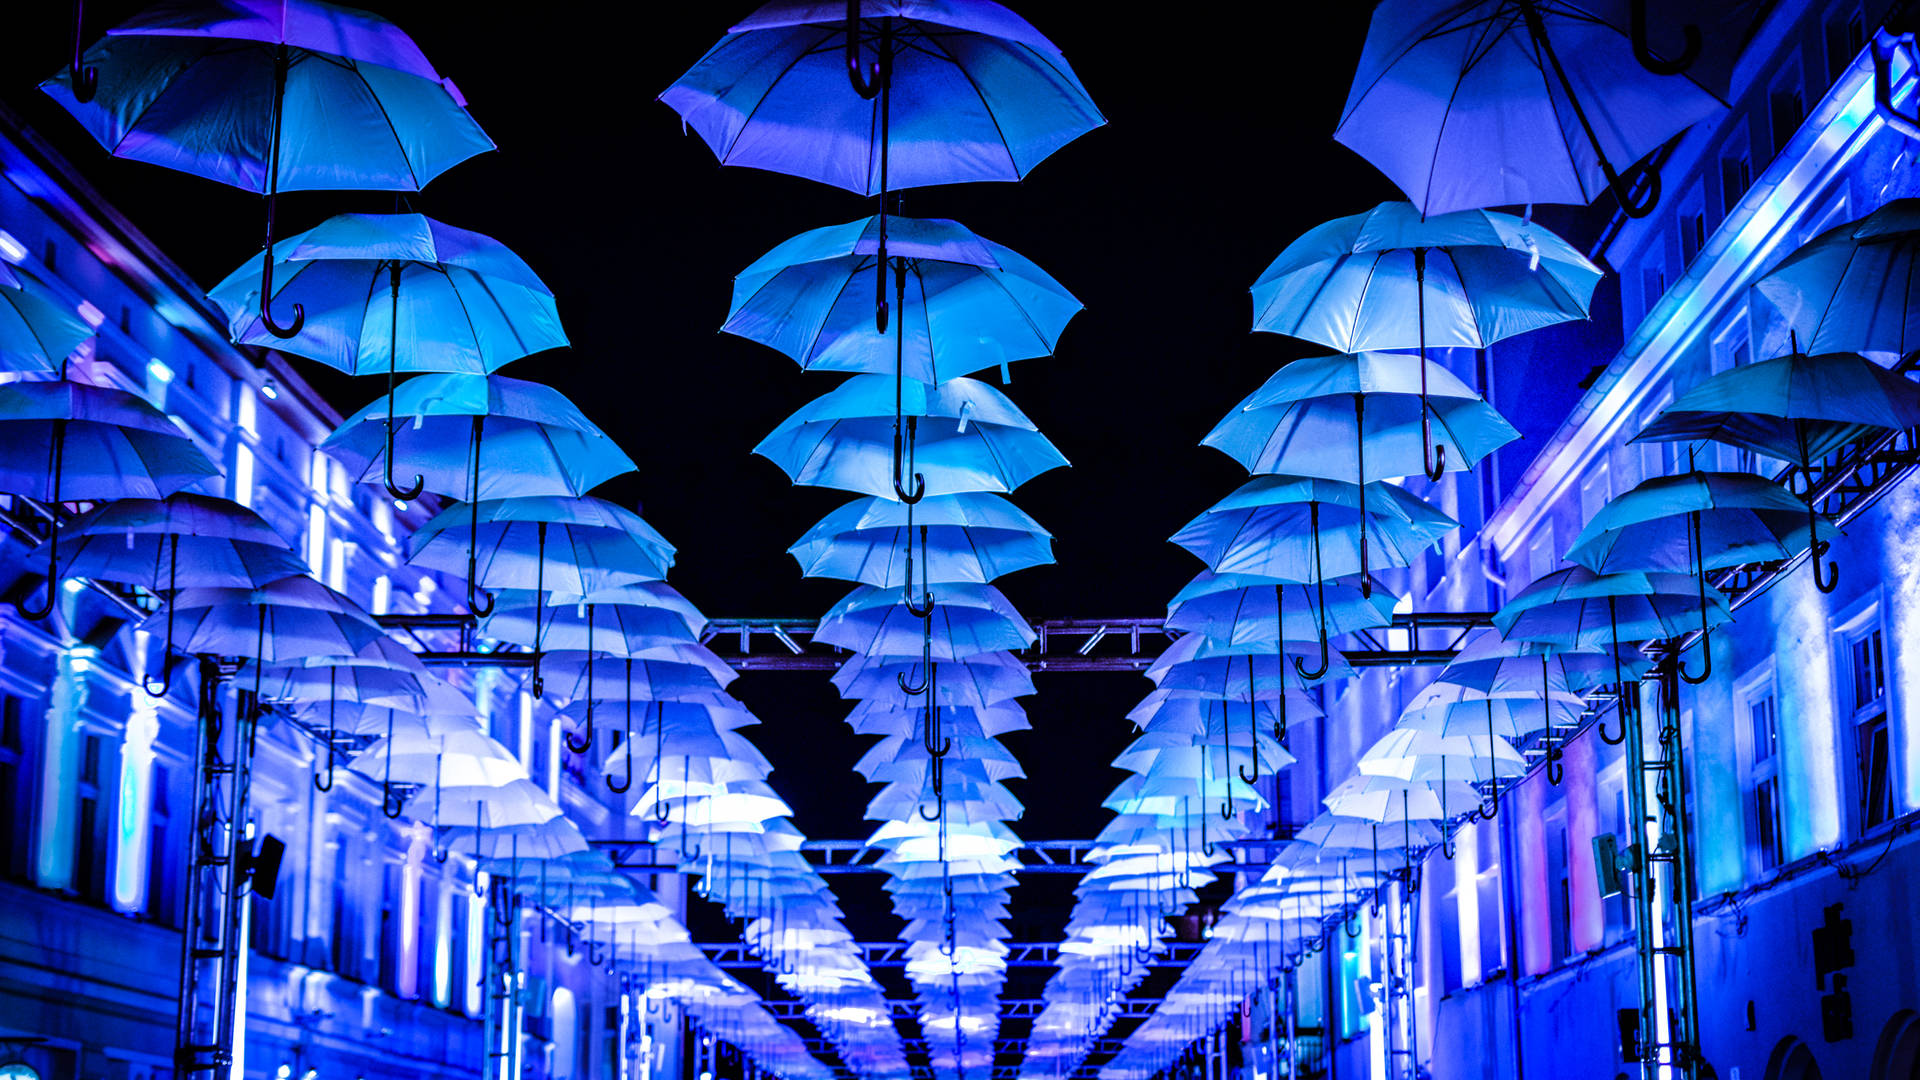 Blue Umbrellas On The Ceiling Background